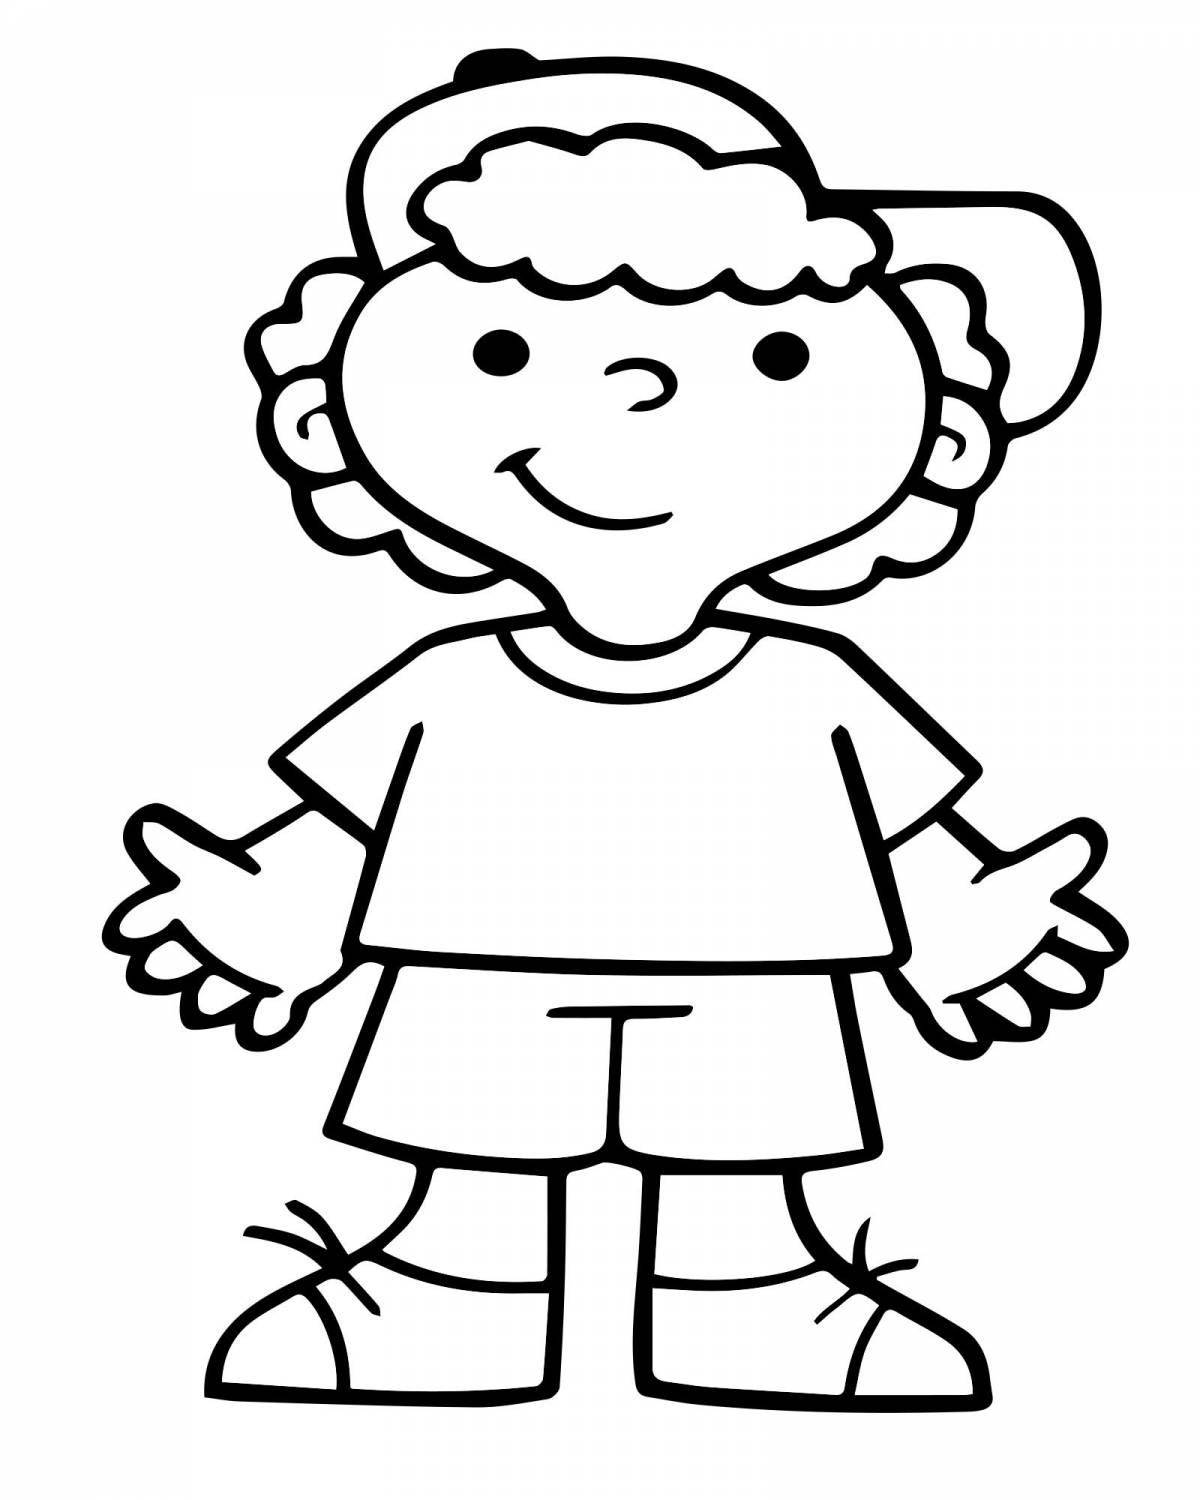 Joyful people coloring pages for kids